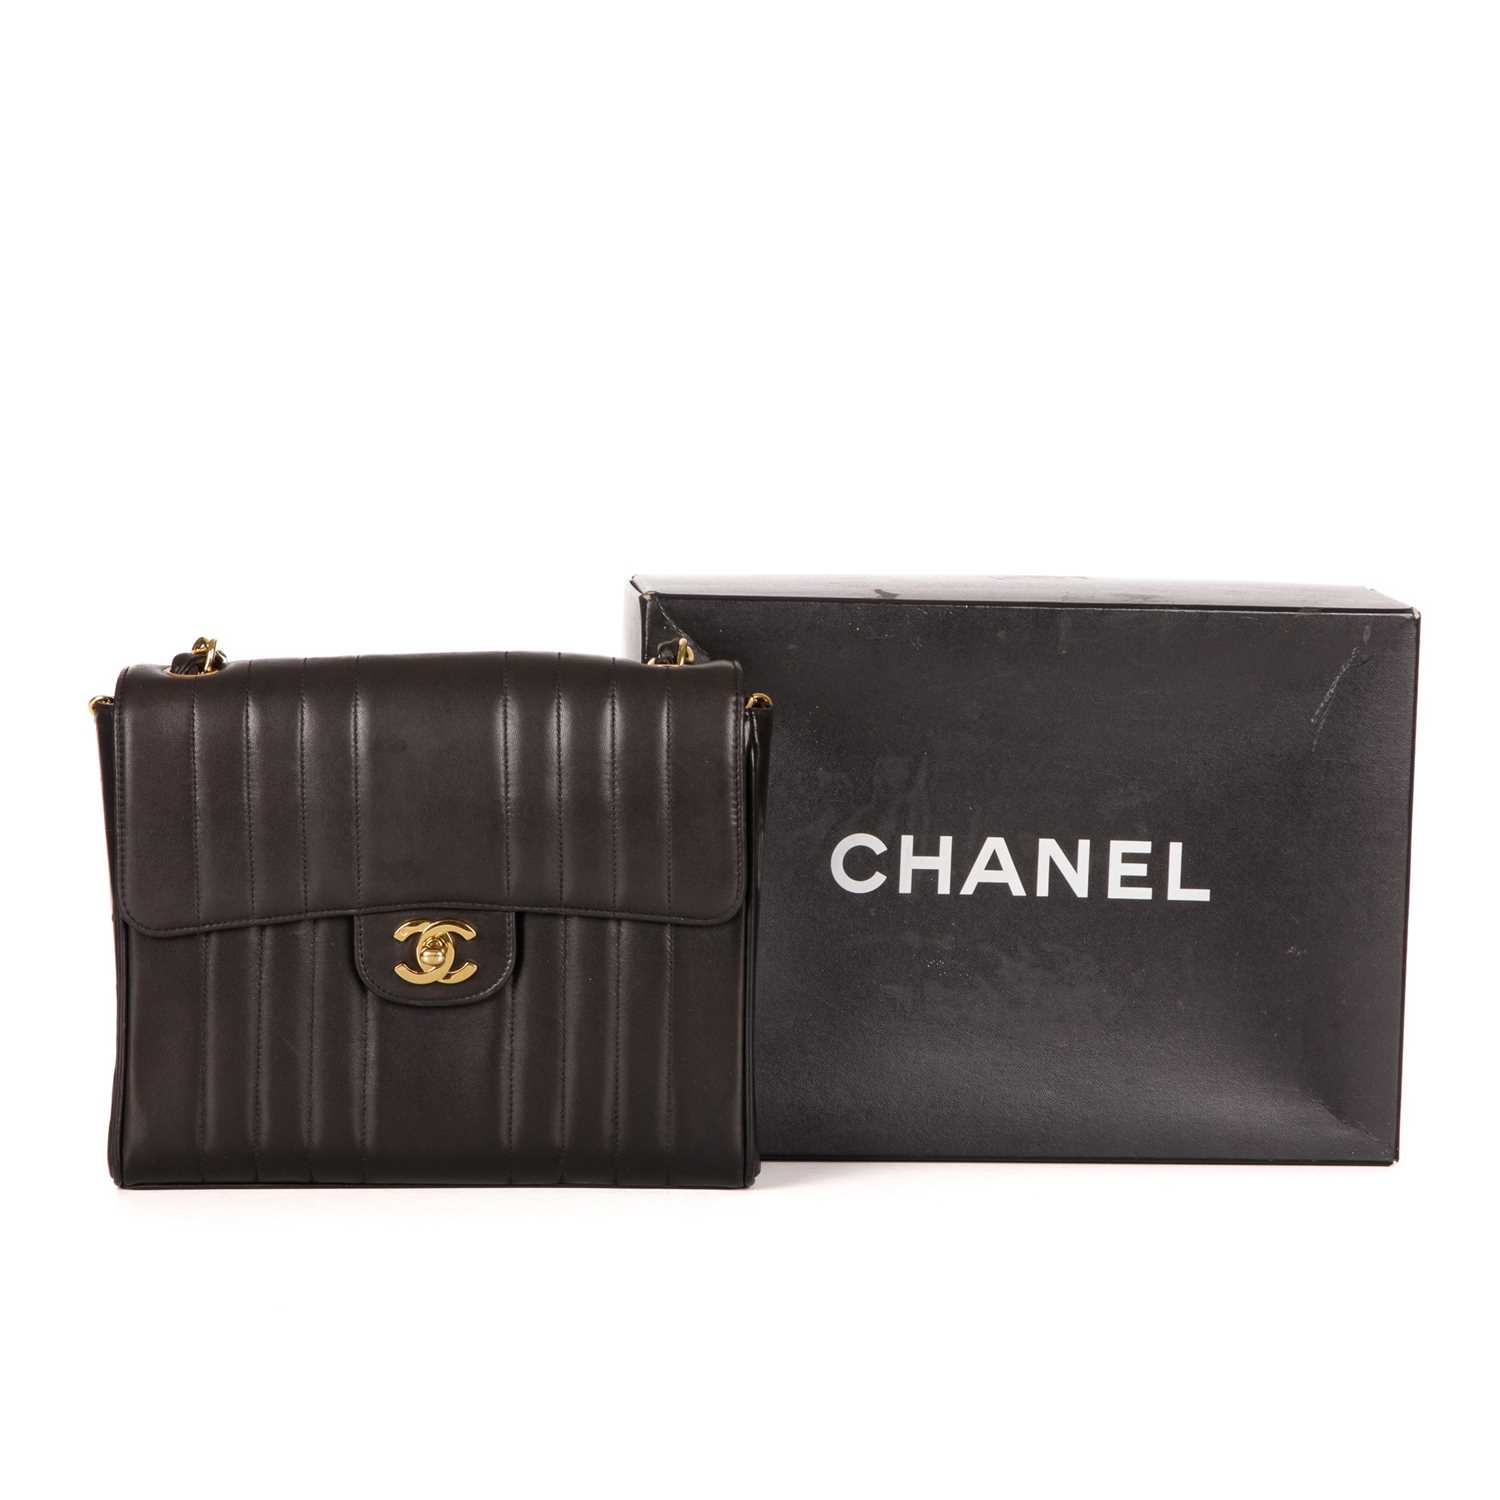 Chanel, a vintage vertical Classic Flap handbag, crafted from black lambskin leather, with - Image 5 of 5